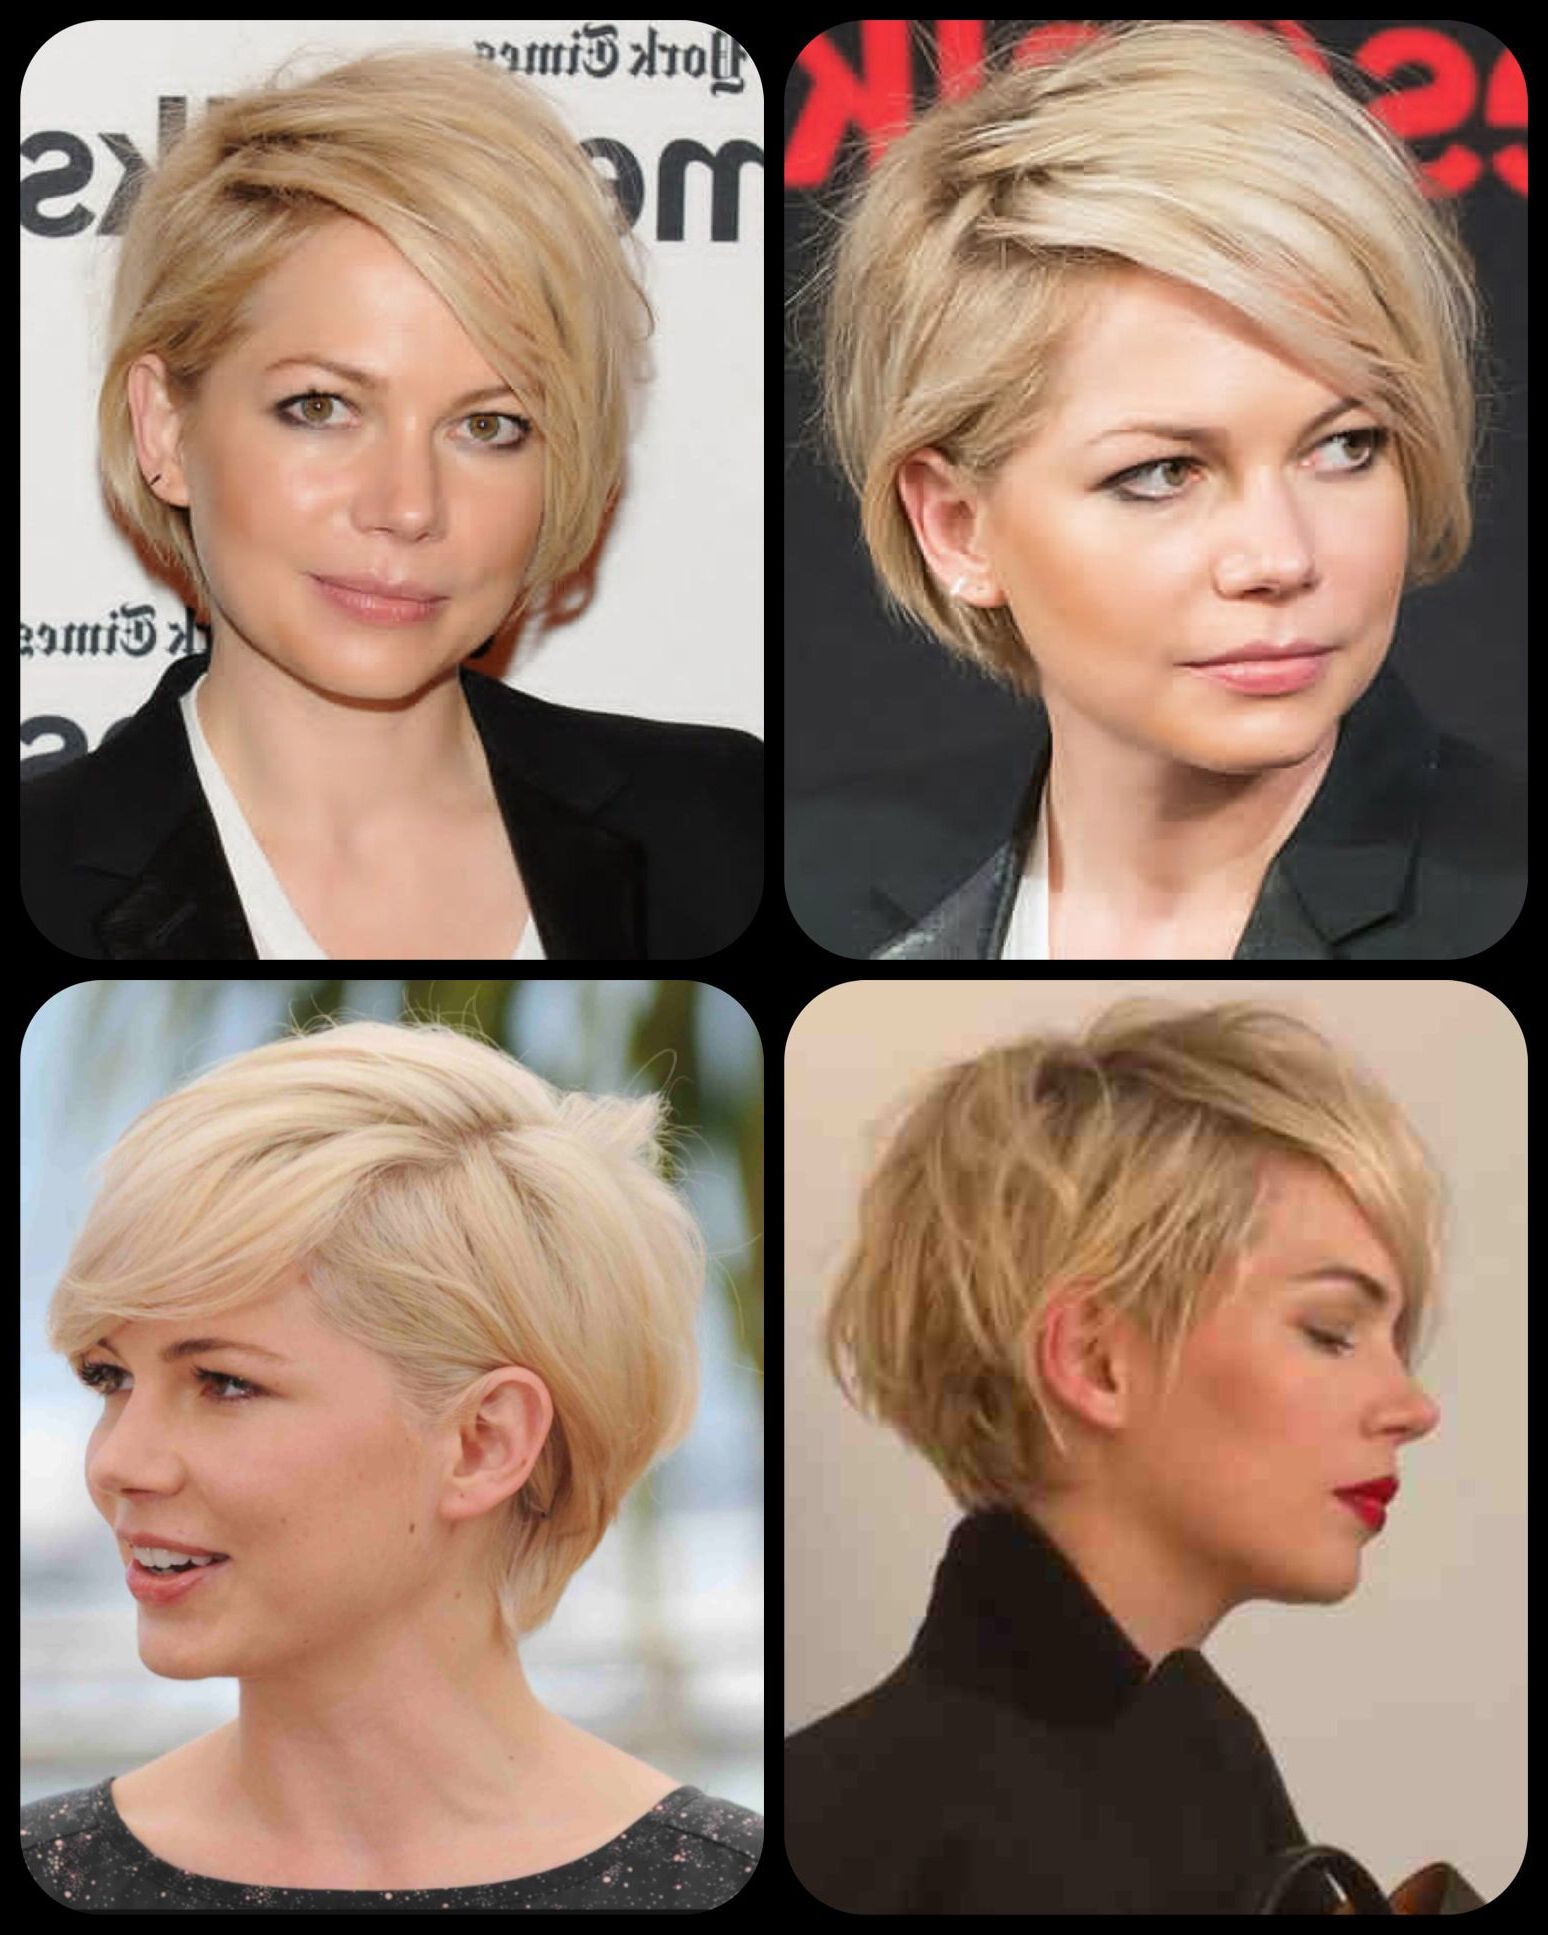 Michelle Williams' Grown Out Pixie Cut | Hair | Pinterest | Hair Throughout Stylish Grown Out Pixie Hairstyles (View 1 of 20)